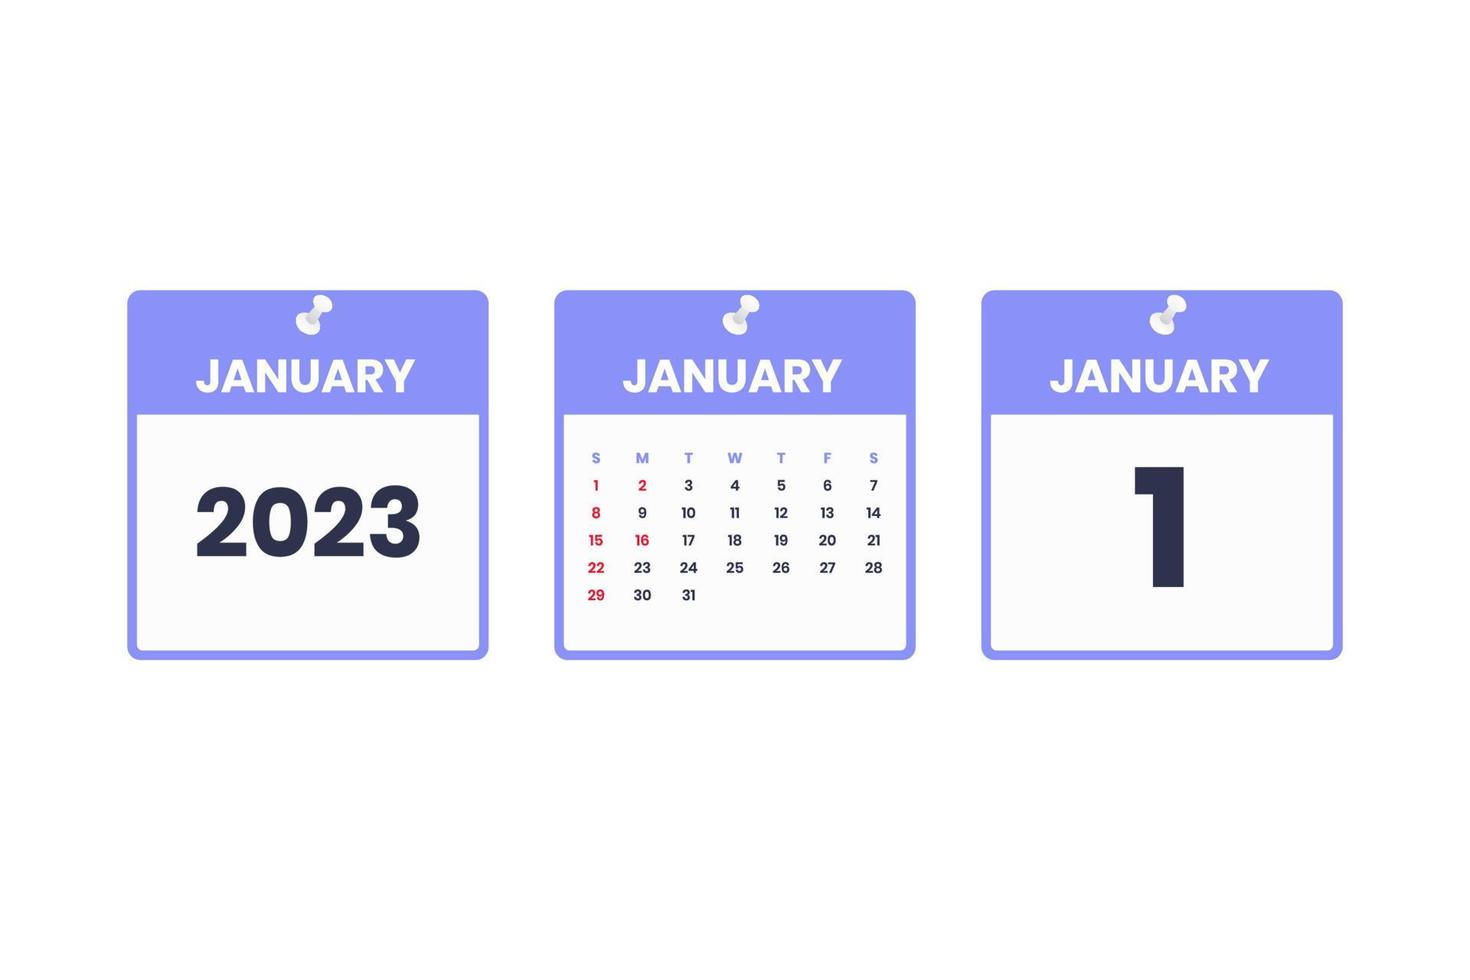 January calendar design. January 1 2023 calendar icon for schedule, appointment, important date concept vector